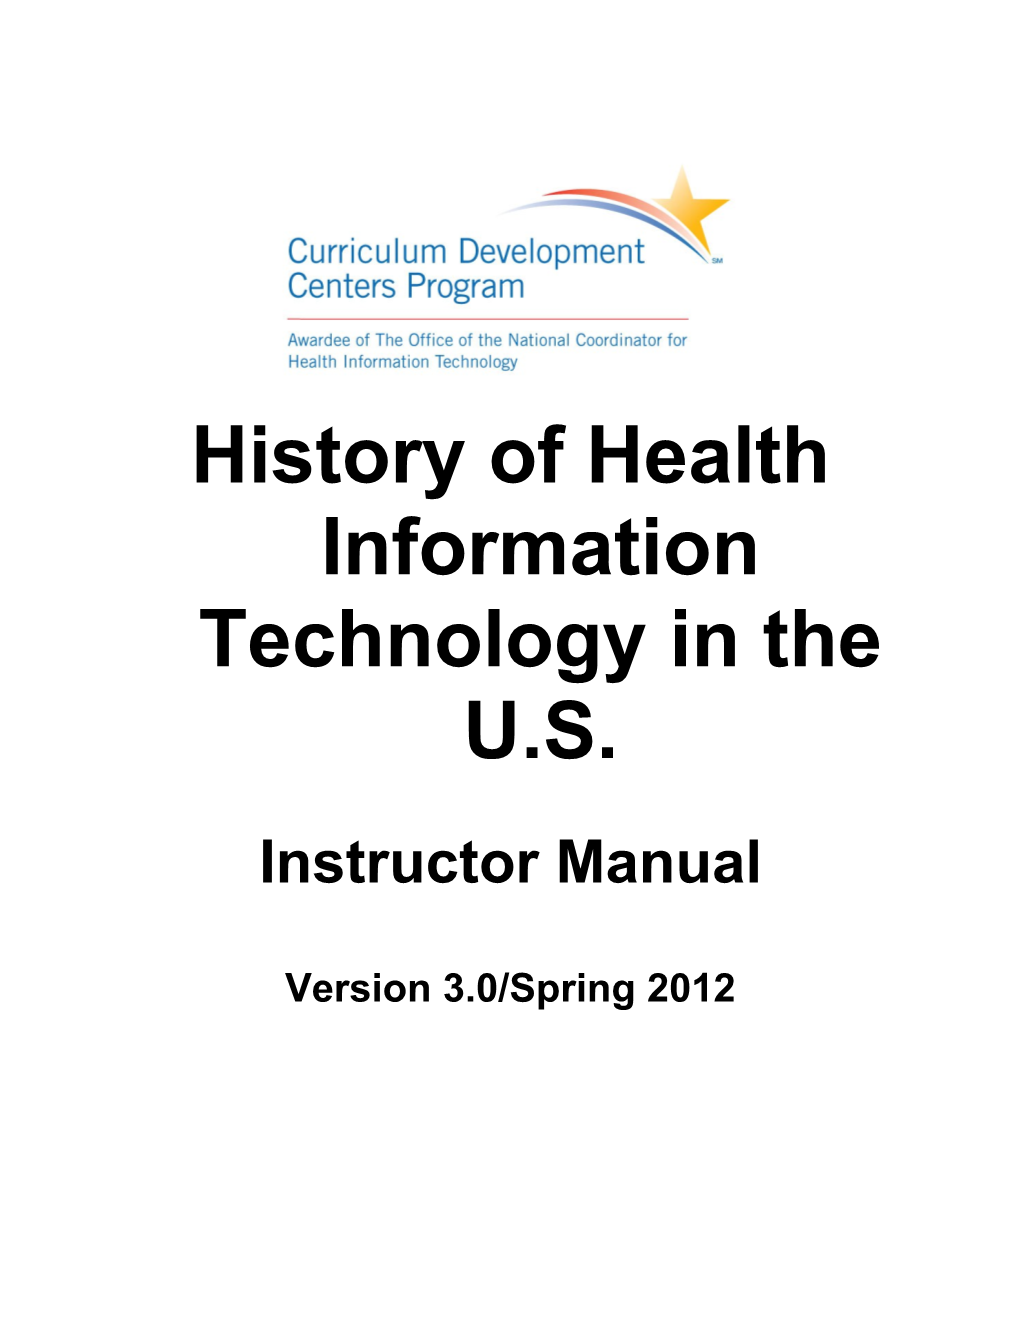 History of Health Information Technology in the U.S